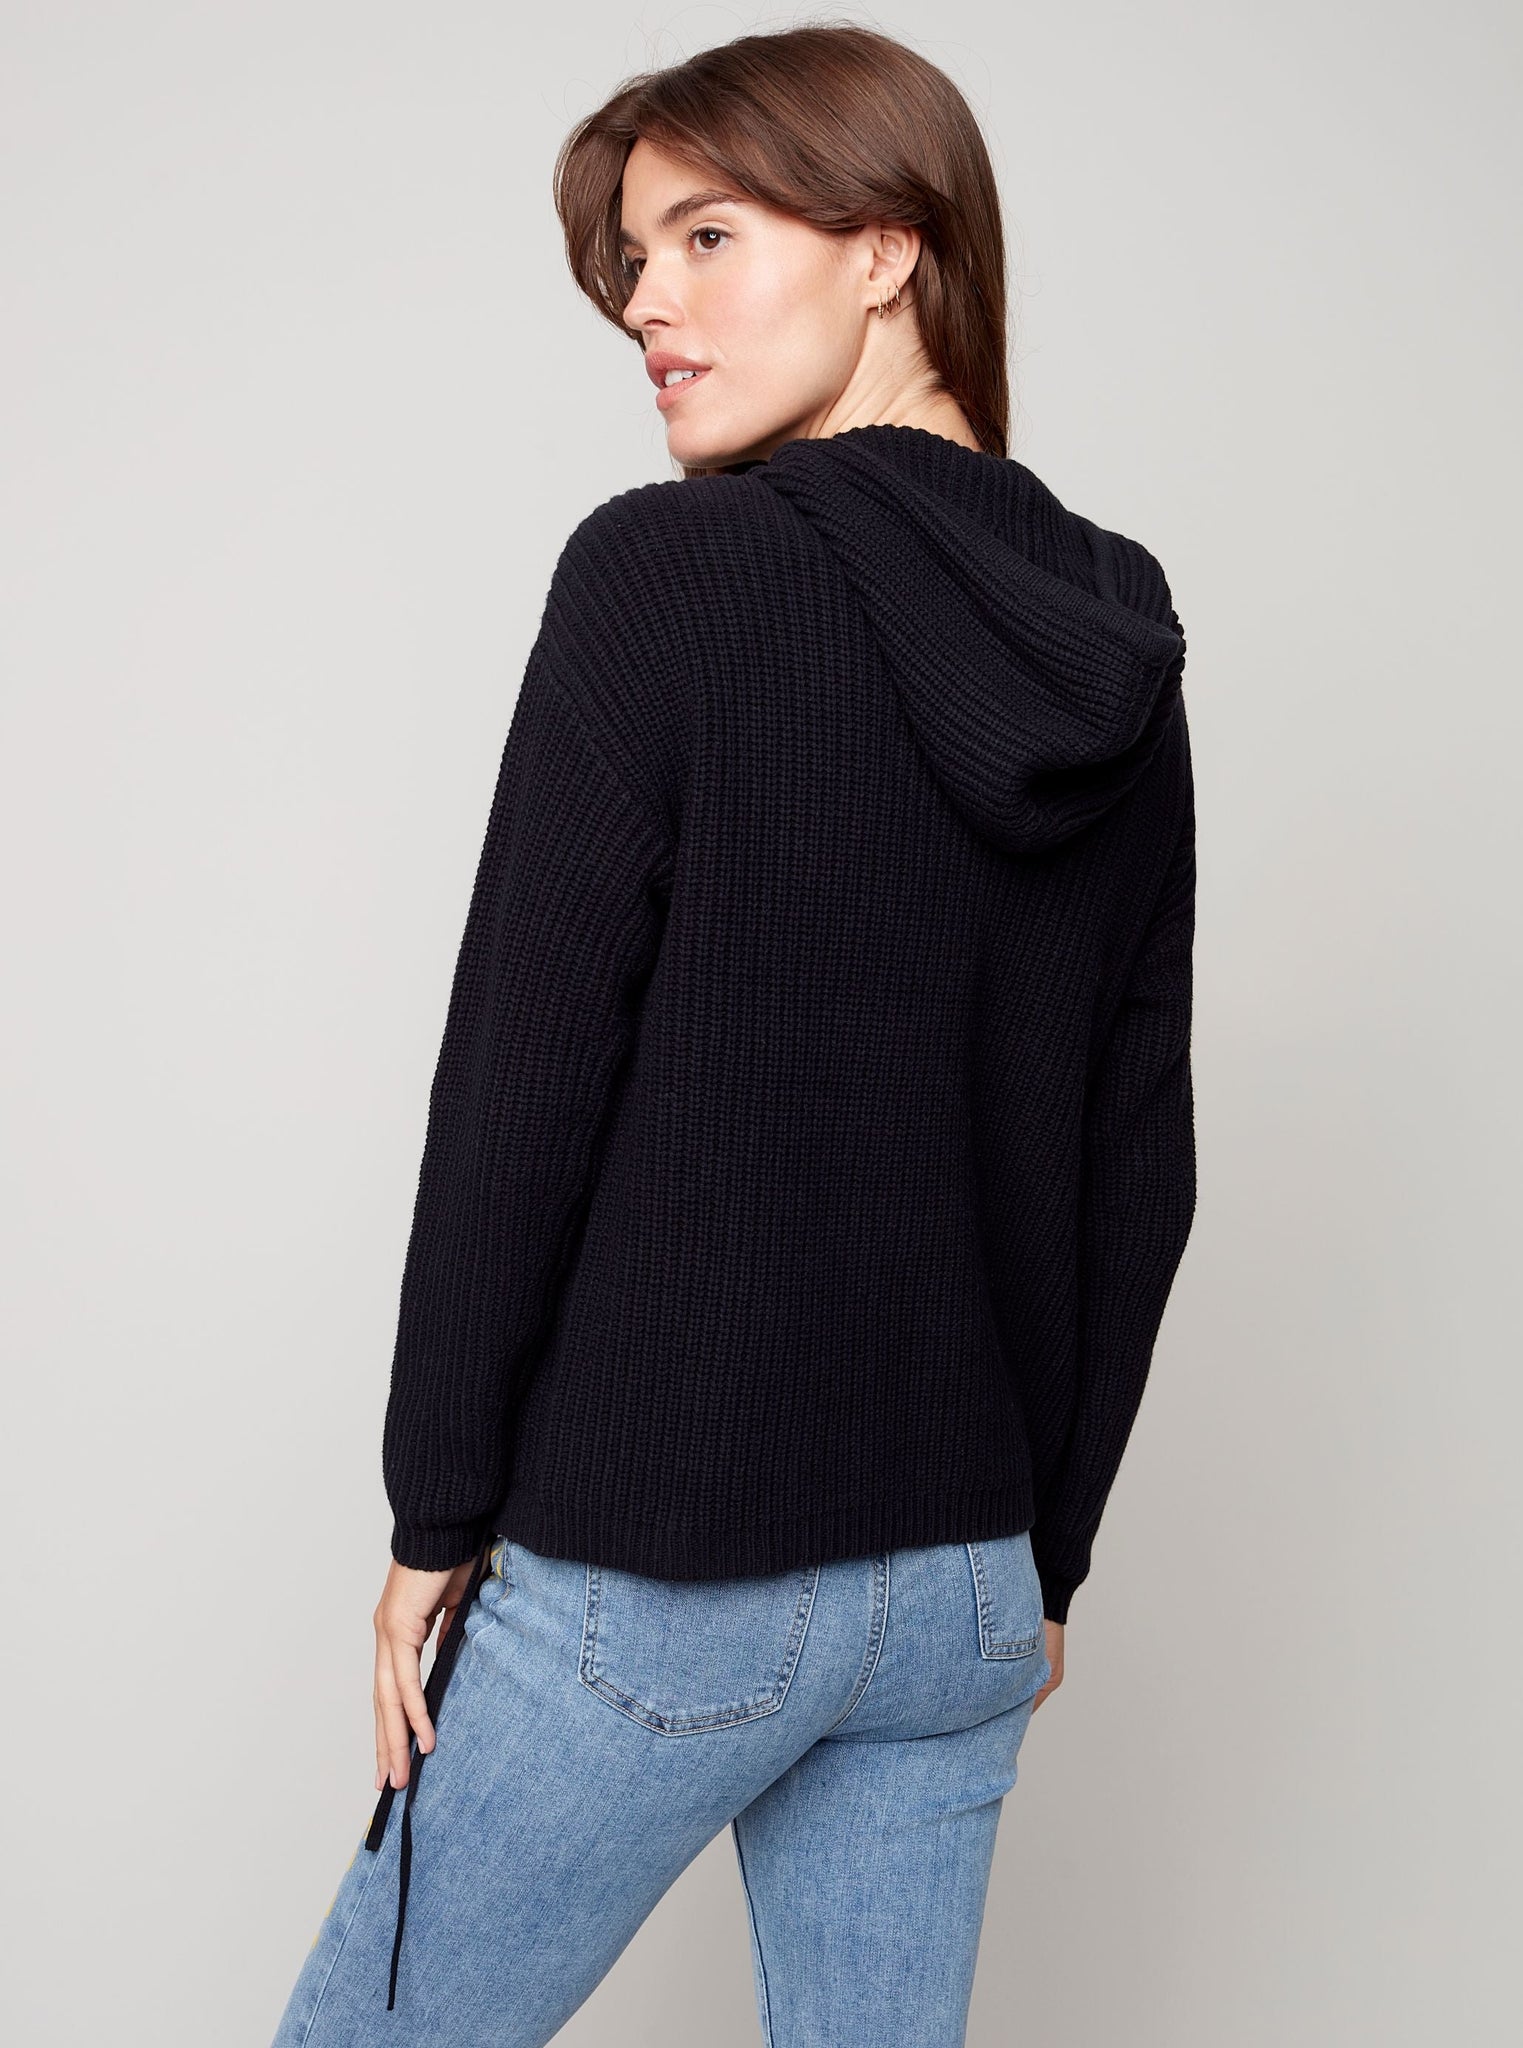 CharlieB Cable and Tie Hooded Sweater [Black-C2432]